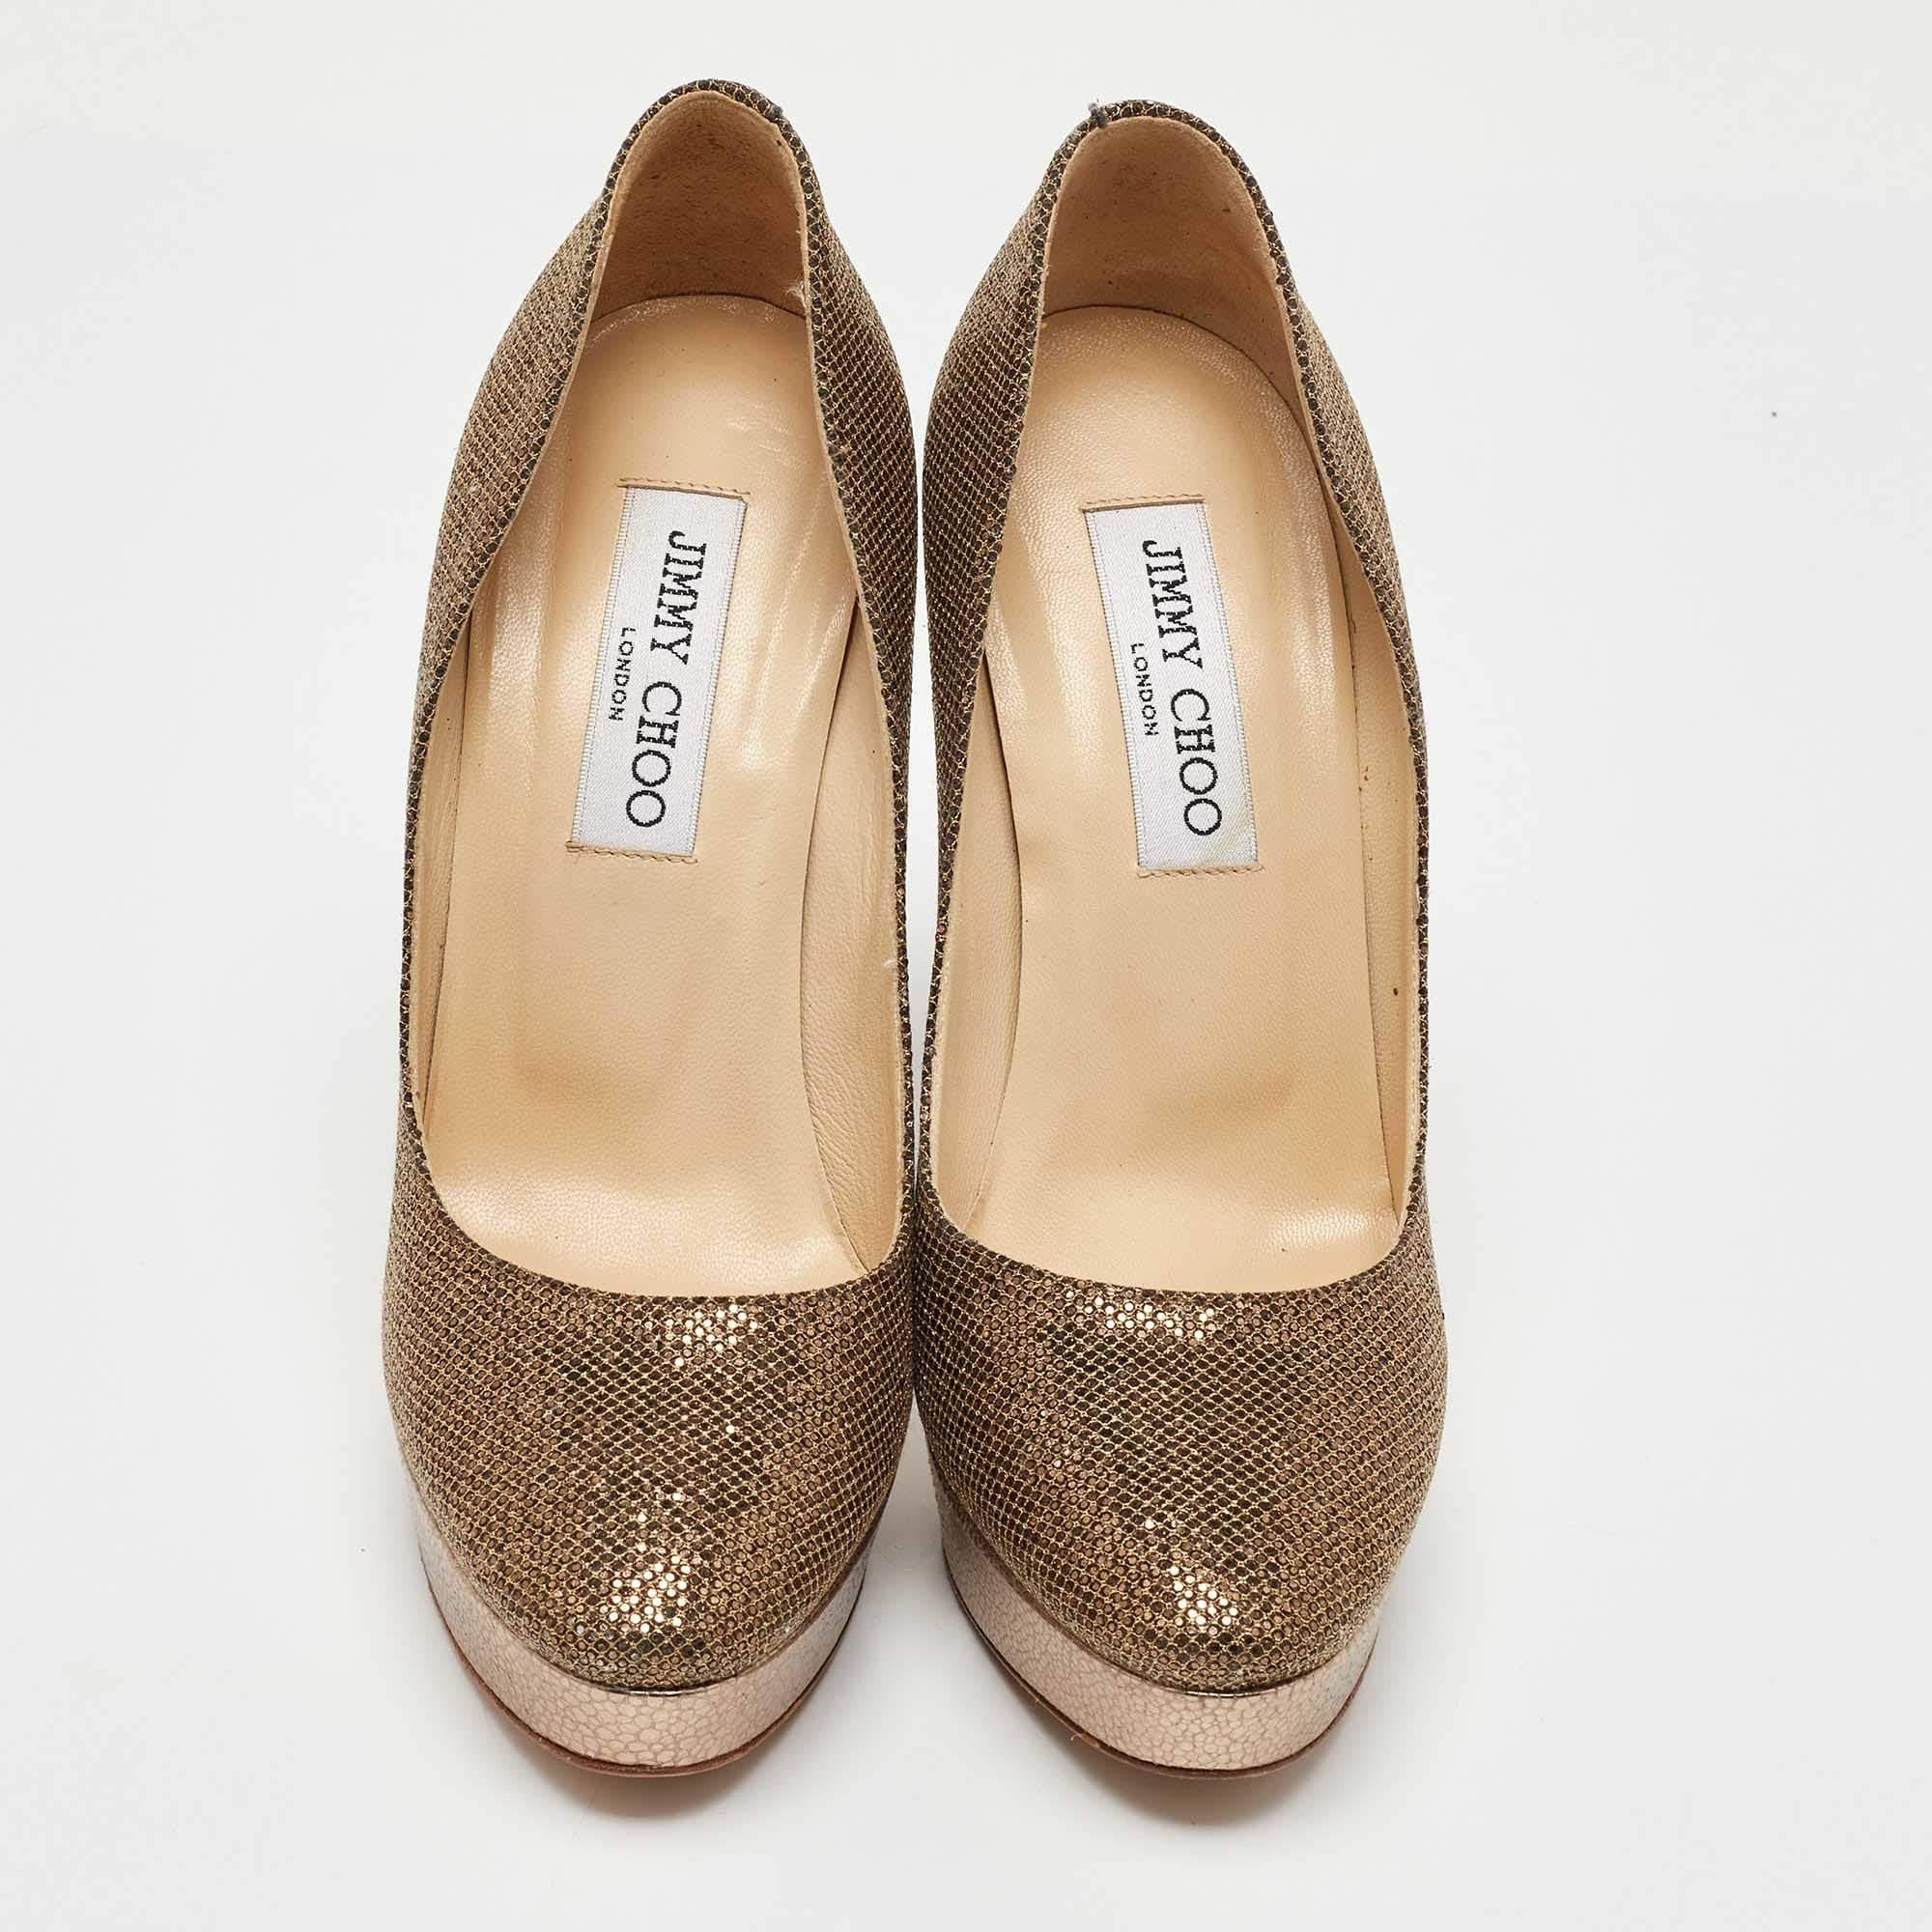 Featuring a glitter & leather body, these Cosmic pumps showcase style and elegance. This pair by Jimmy Choo has platforms, 13 cm high heels, and a sparkly finish. The pumps will look great with formal as well as casual wear.

